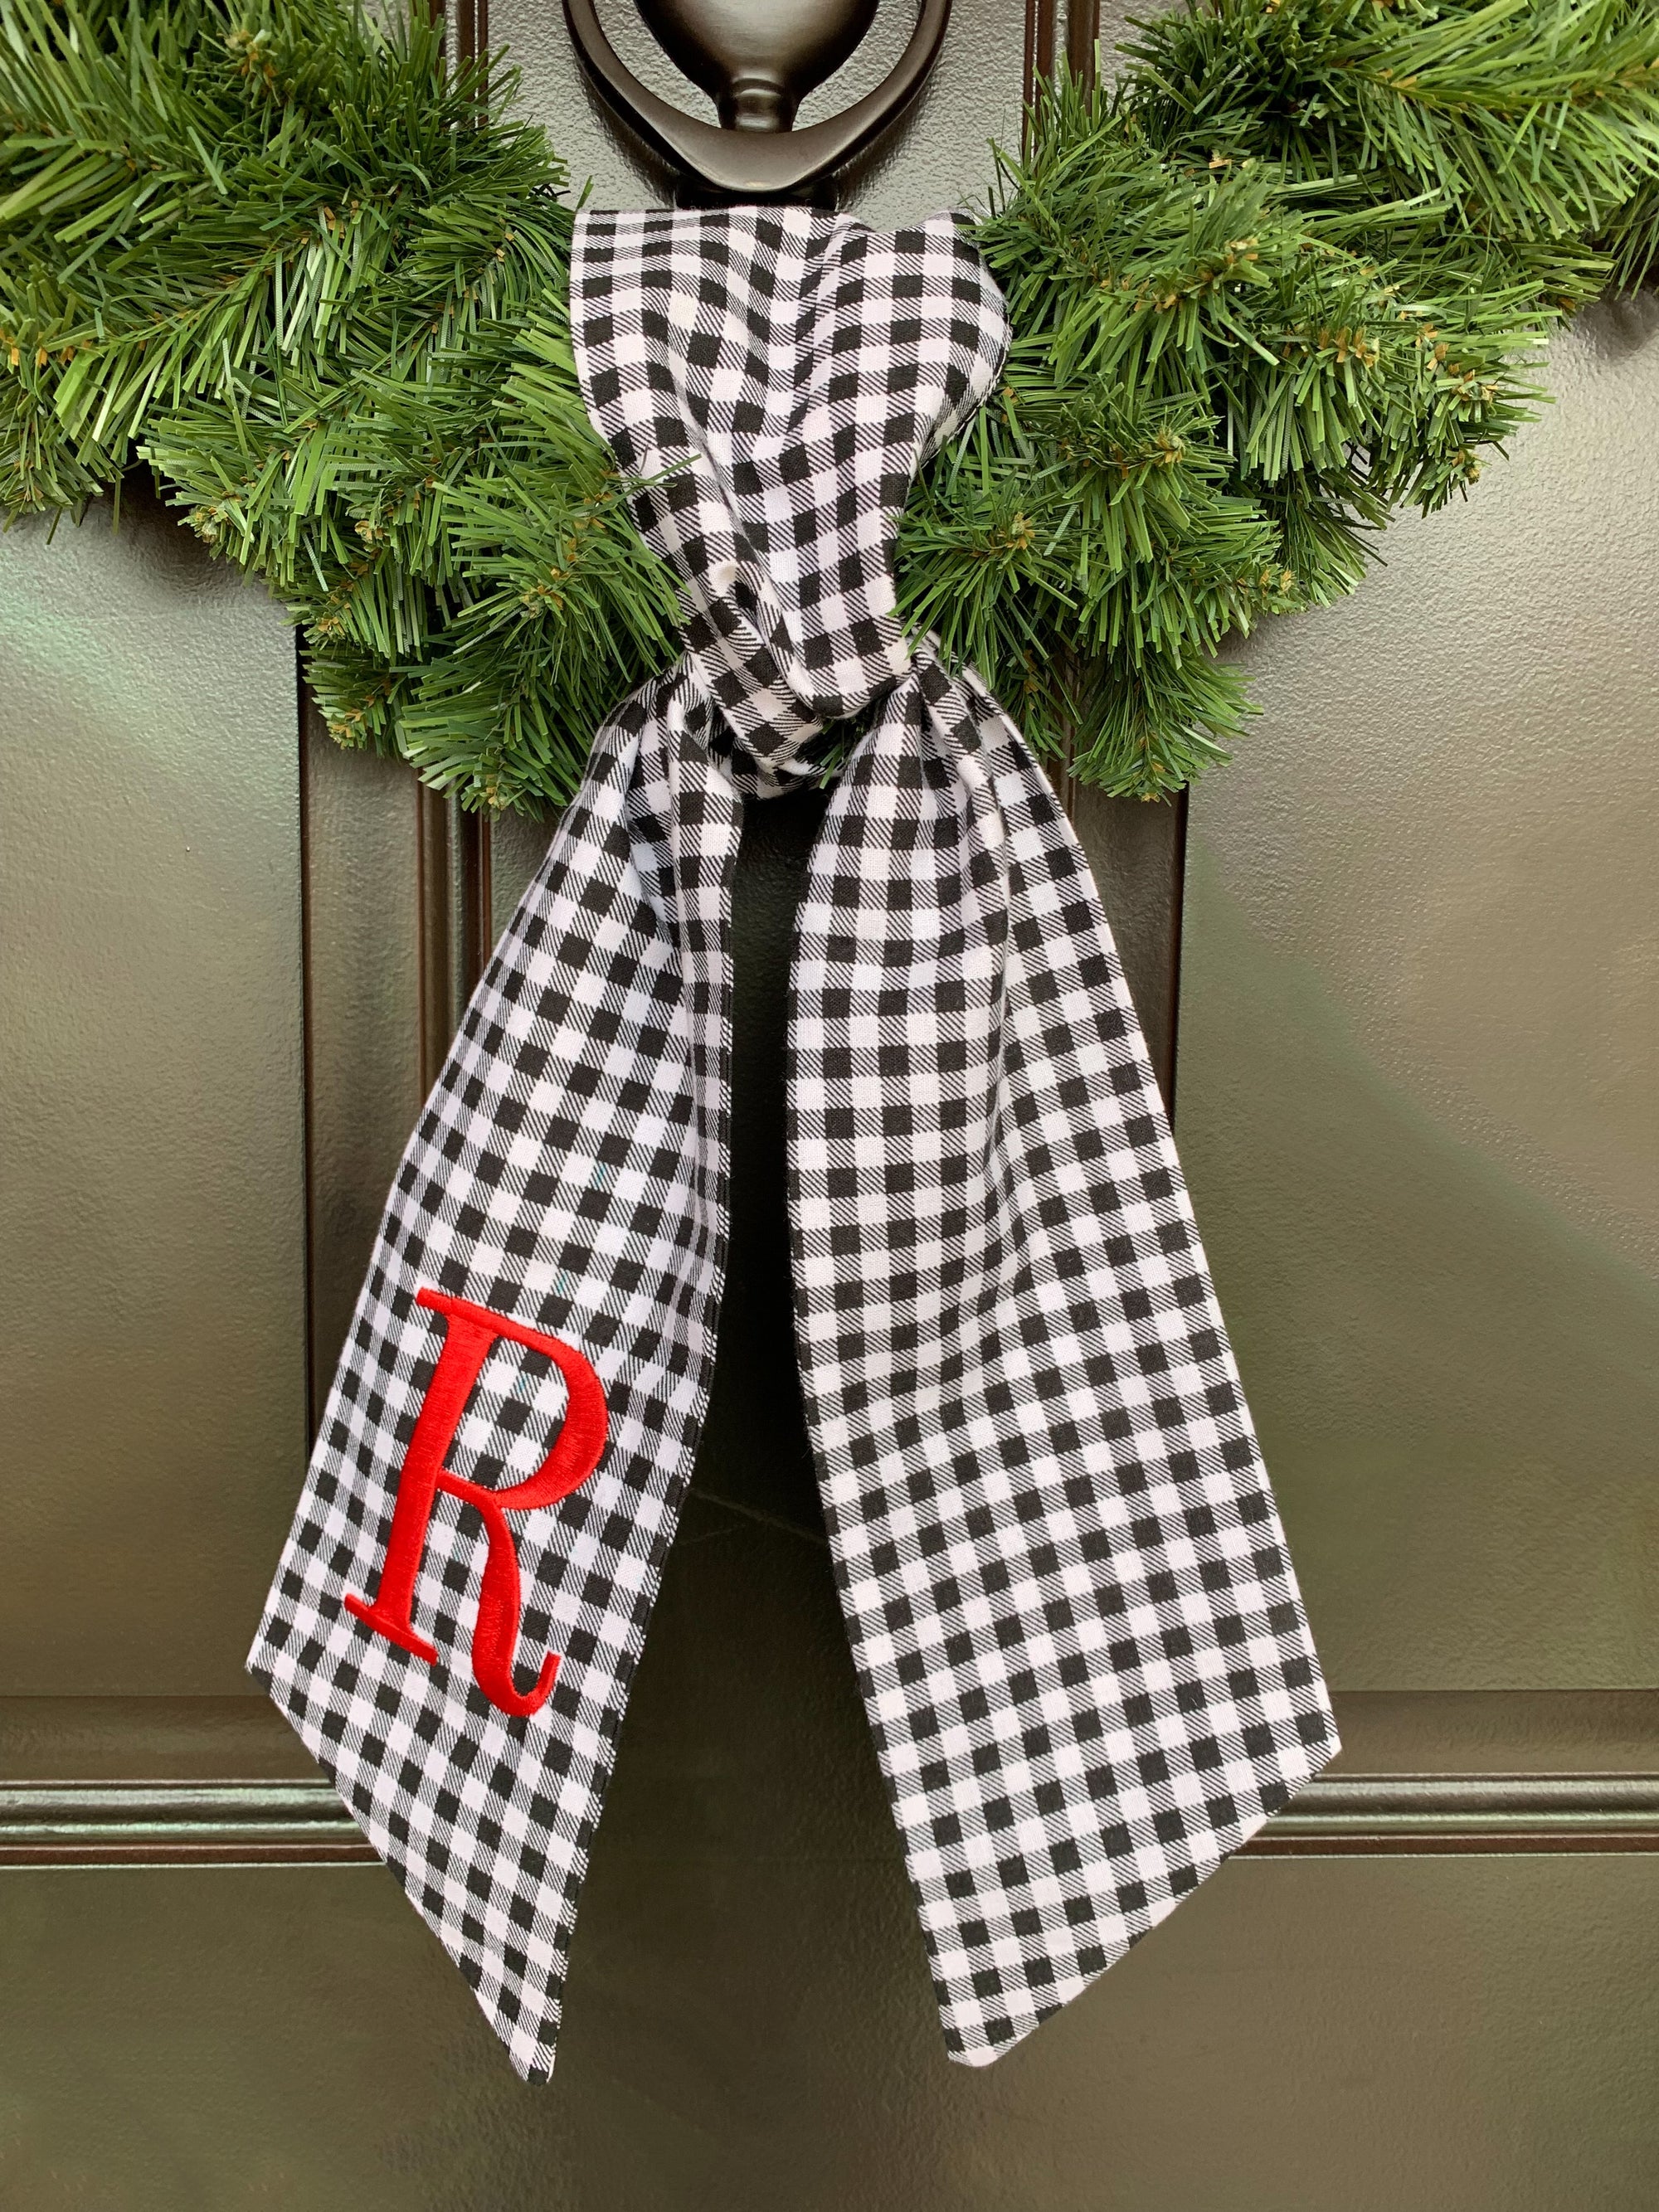 Black Gingham Wreath Wrap - Custom Embroidered, Holiday, Bridal Shower, Gameday Decor & More